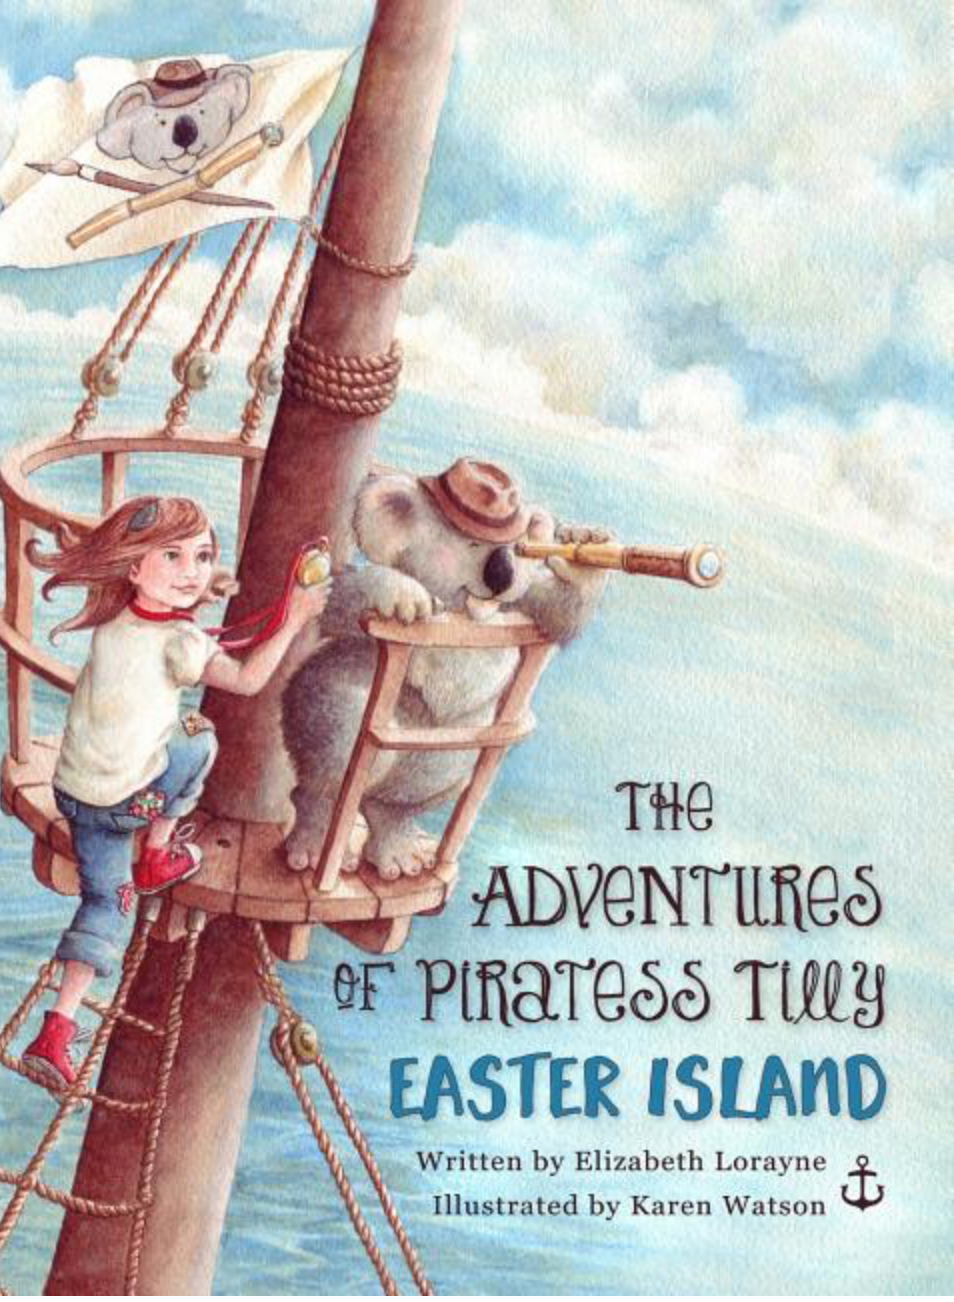 The Adventures of Piratess Tilly Easter Island